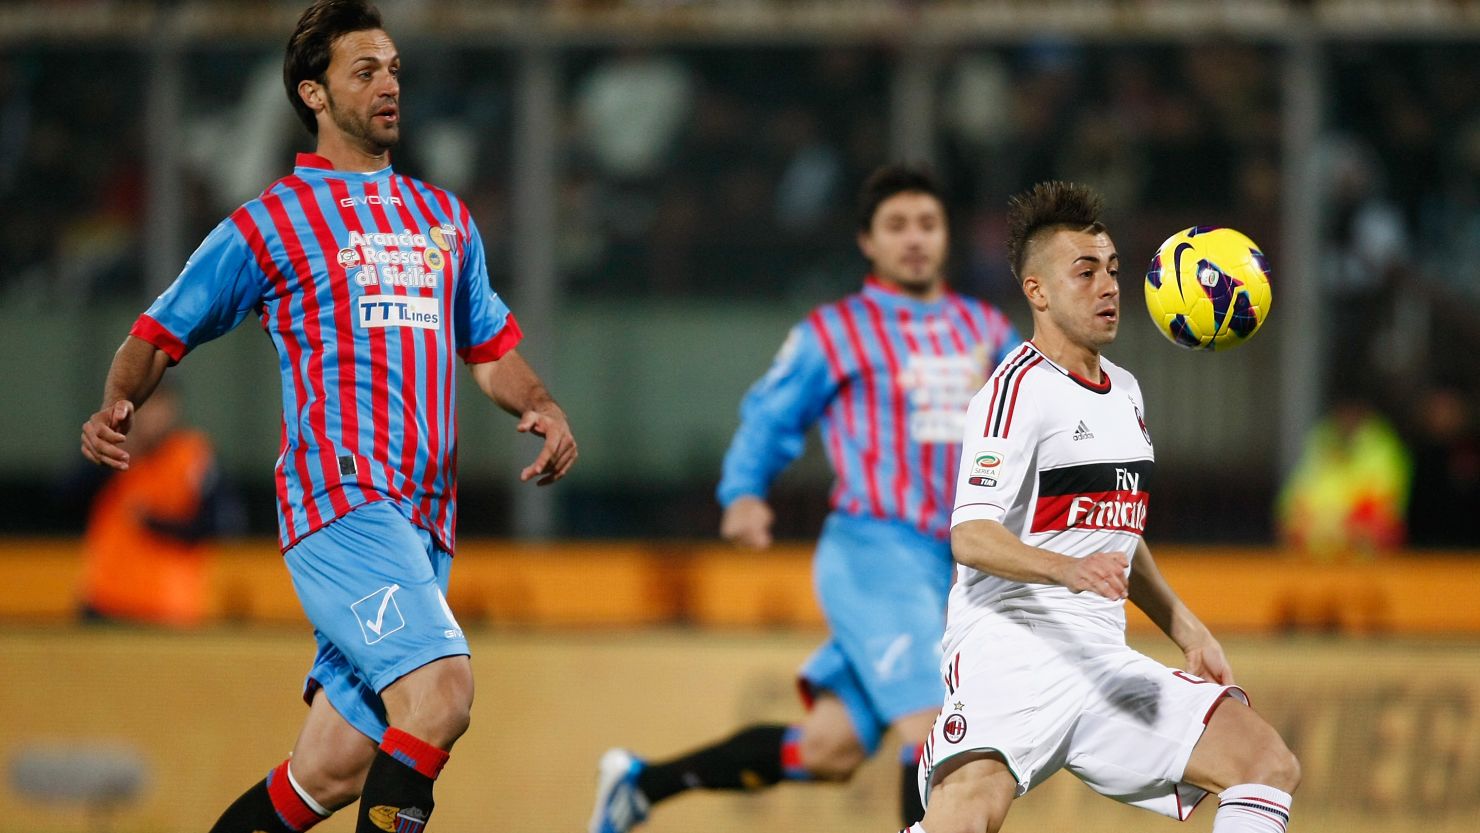 Stephan El Shaarawy scored twice as Milan came from behind to defeat Catania 3-1.